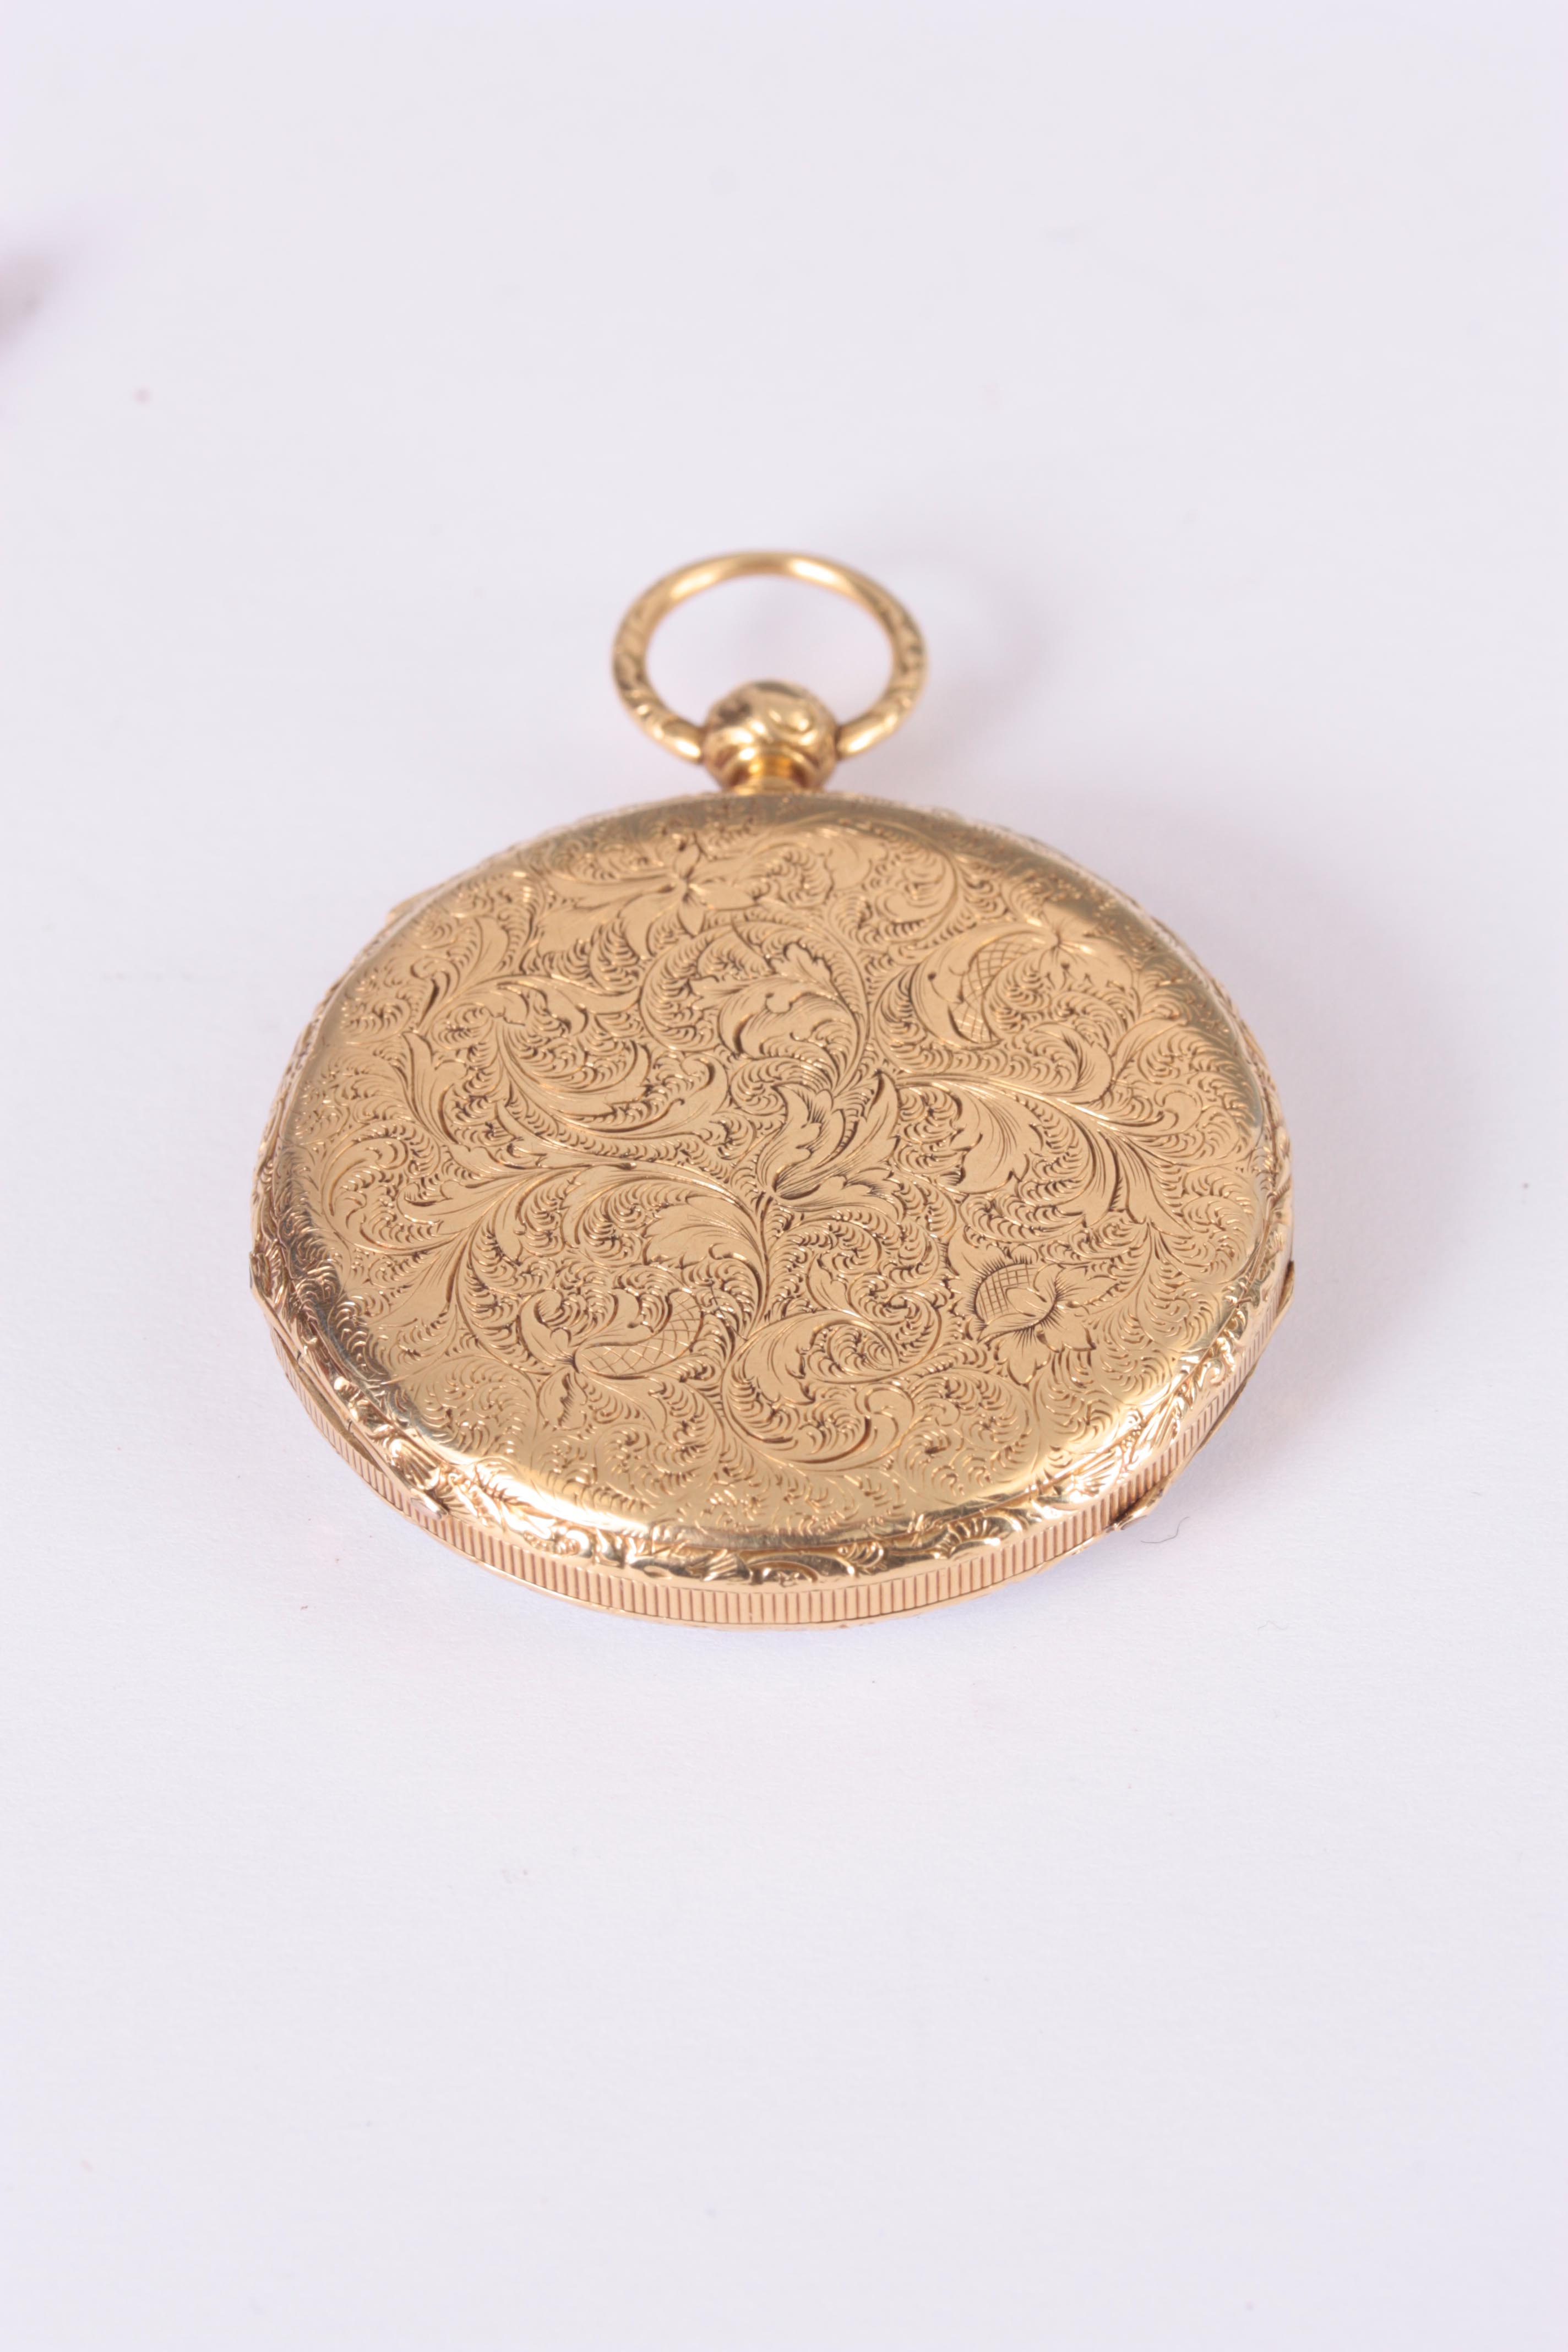 DUBOIS & FILS A MID 19th CENTURY SWISS 18K GOLD QUARTER REPEATING OPEN FACE POCKET WATCH having a - Image 5 of 15